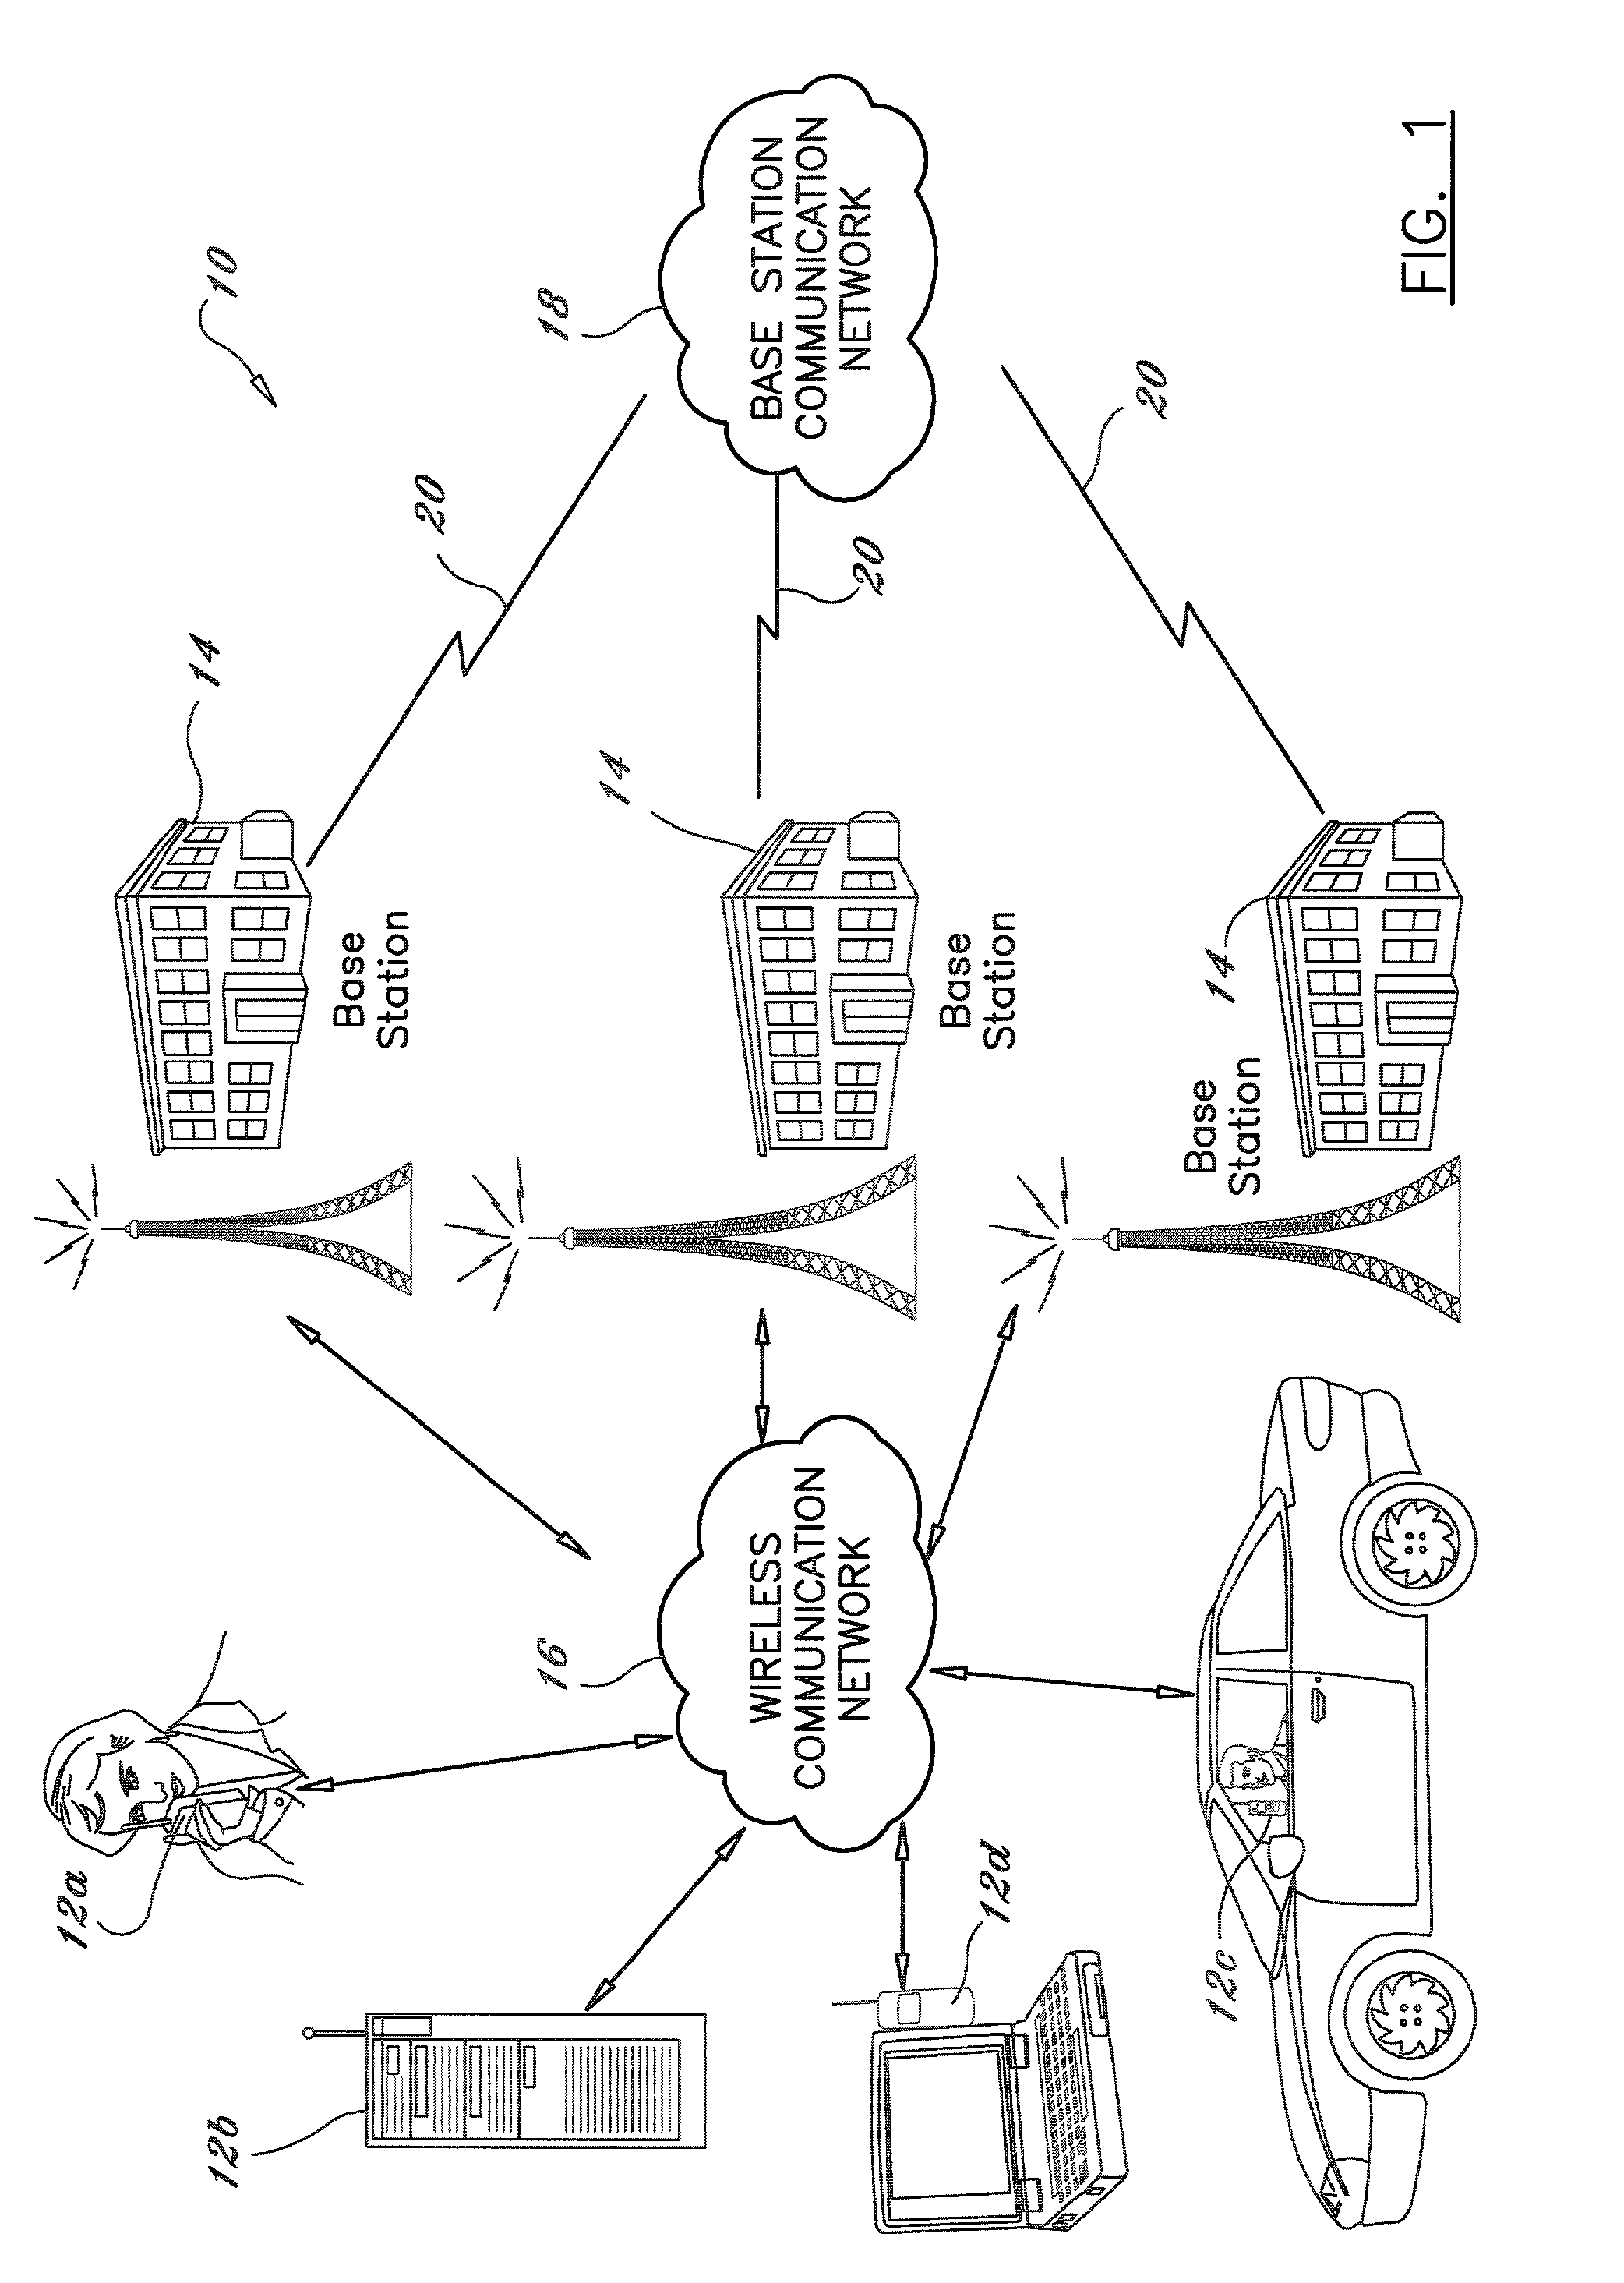 System and method for time slotted code division multiple access communication in a wireless communication environment